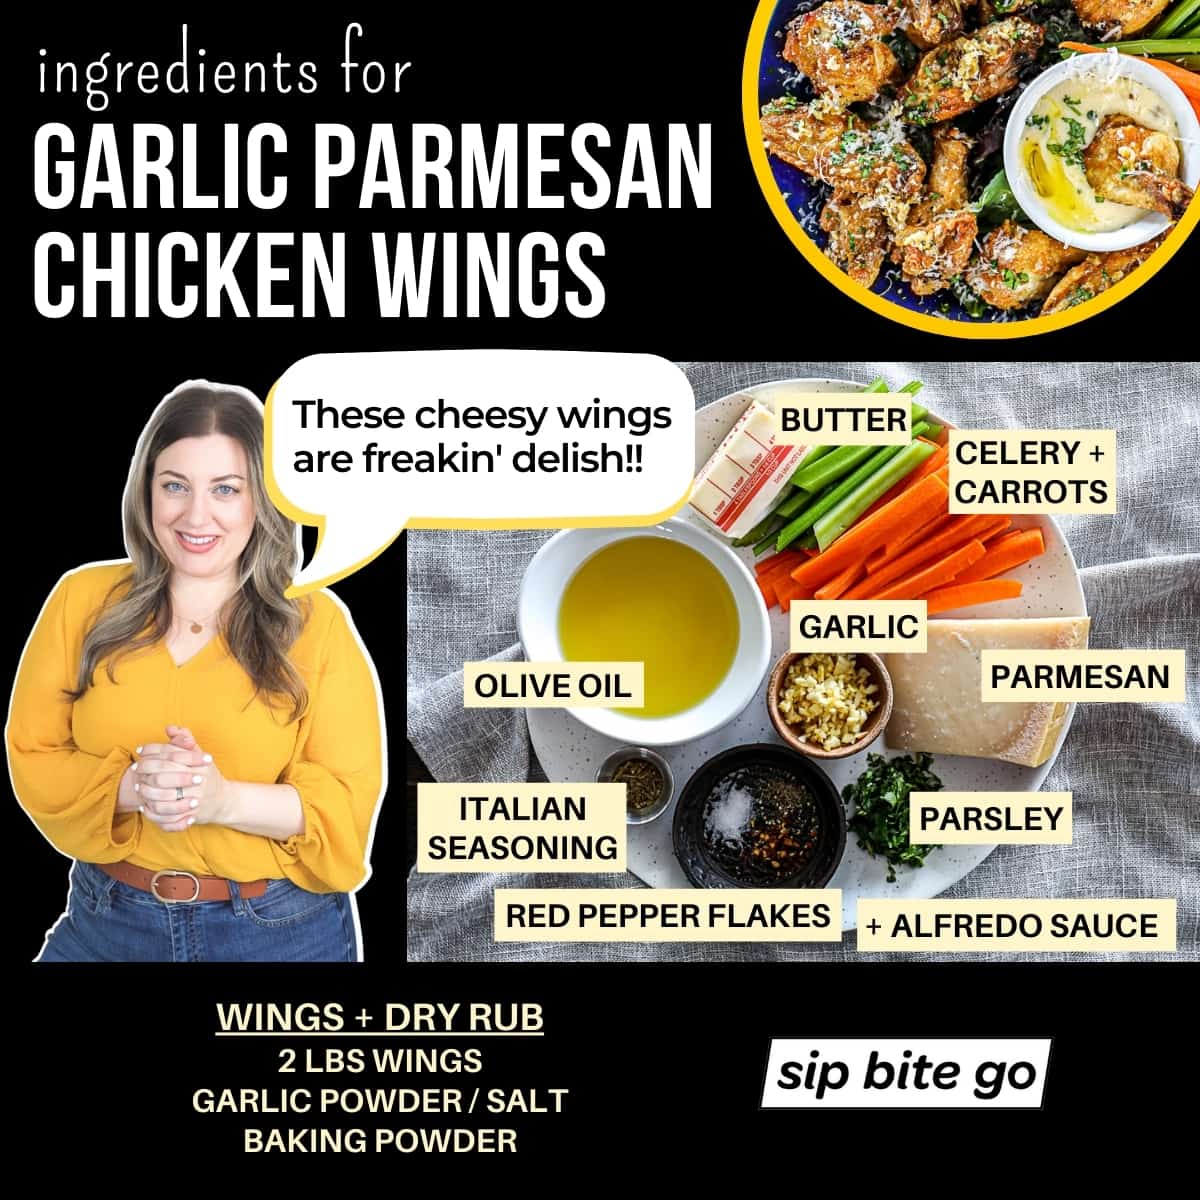 Infographic chart with Ingredients for Garlic Parmesan Chicken Wings Recipe with dry rub and sauce.